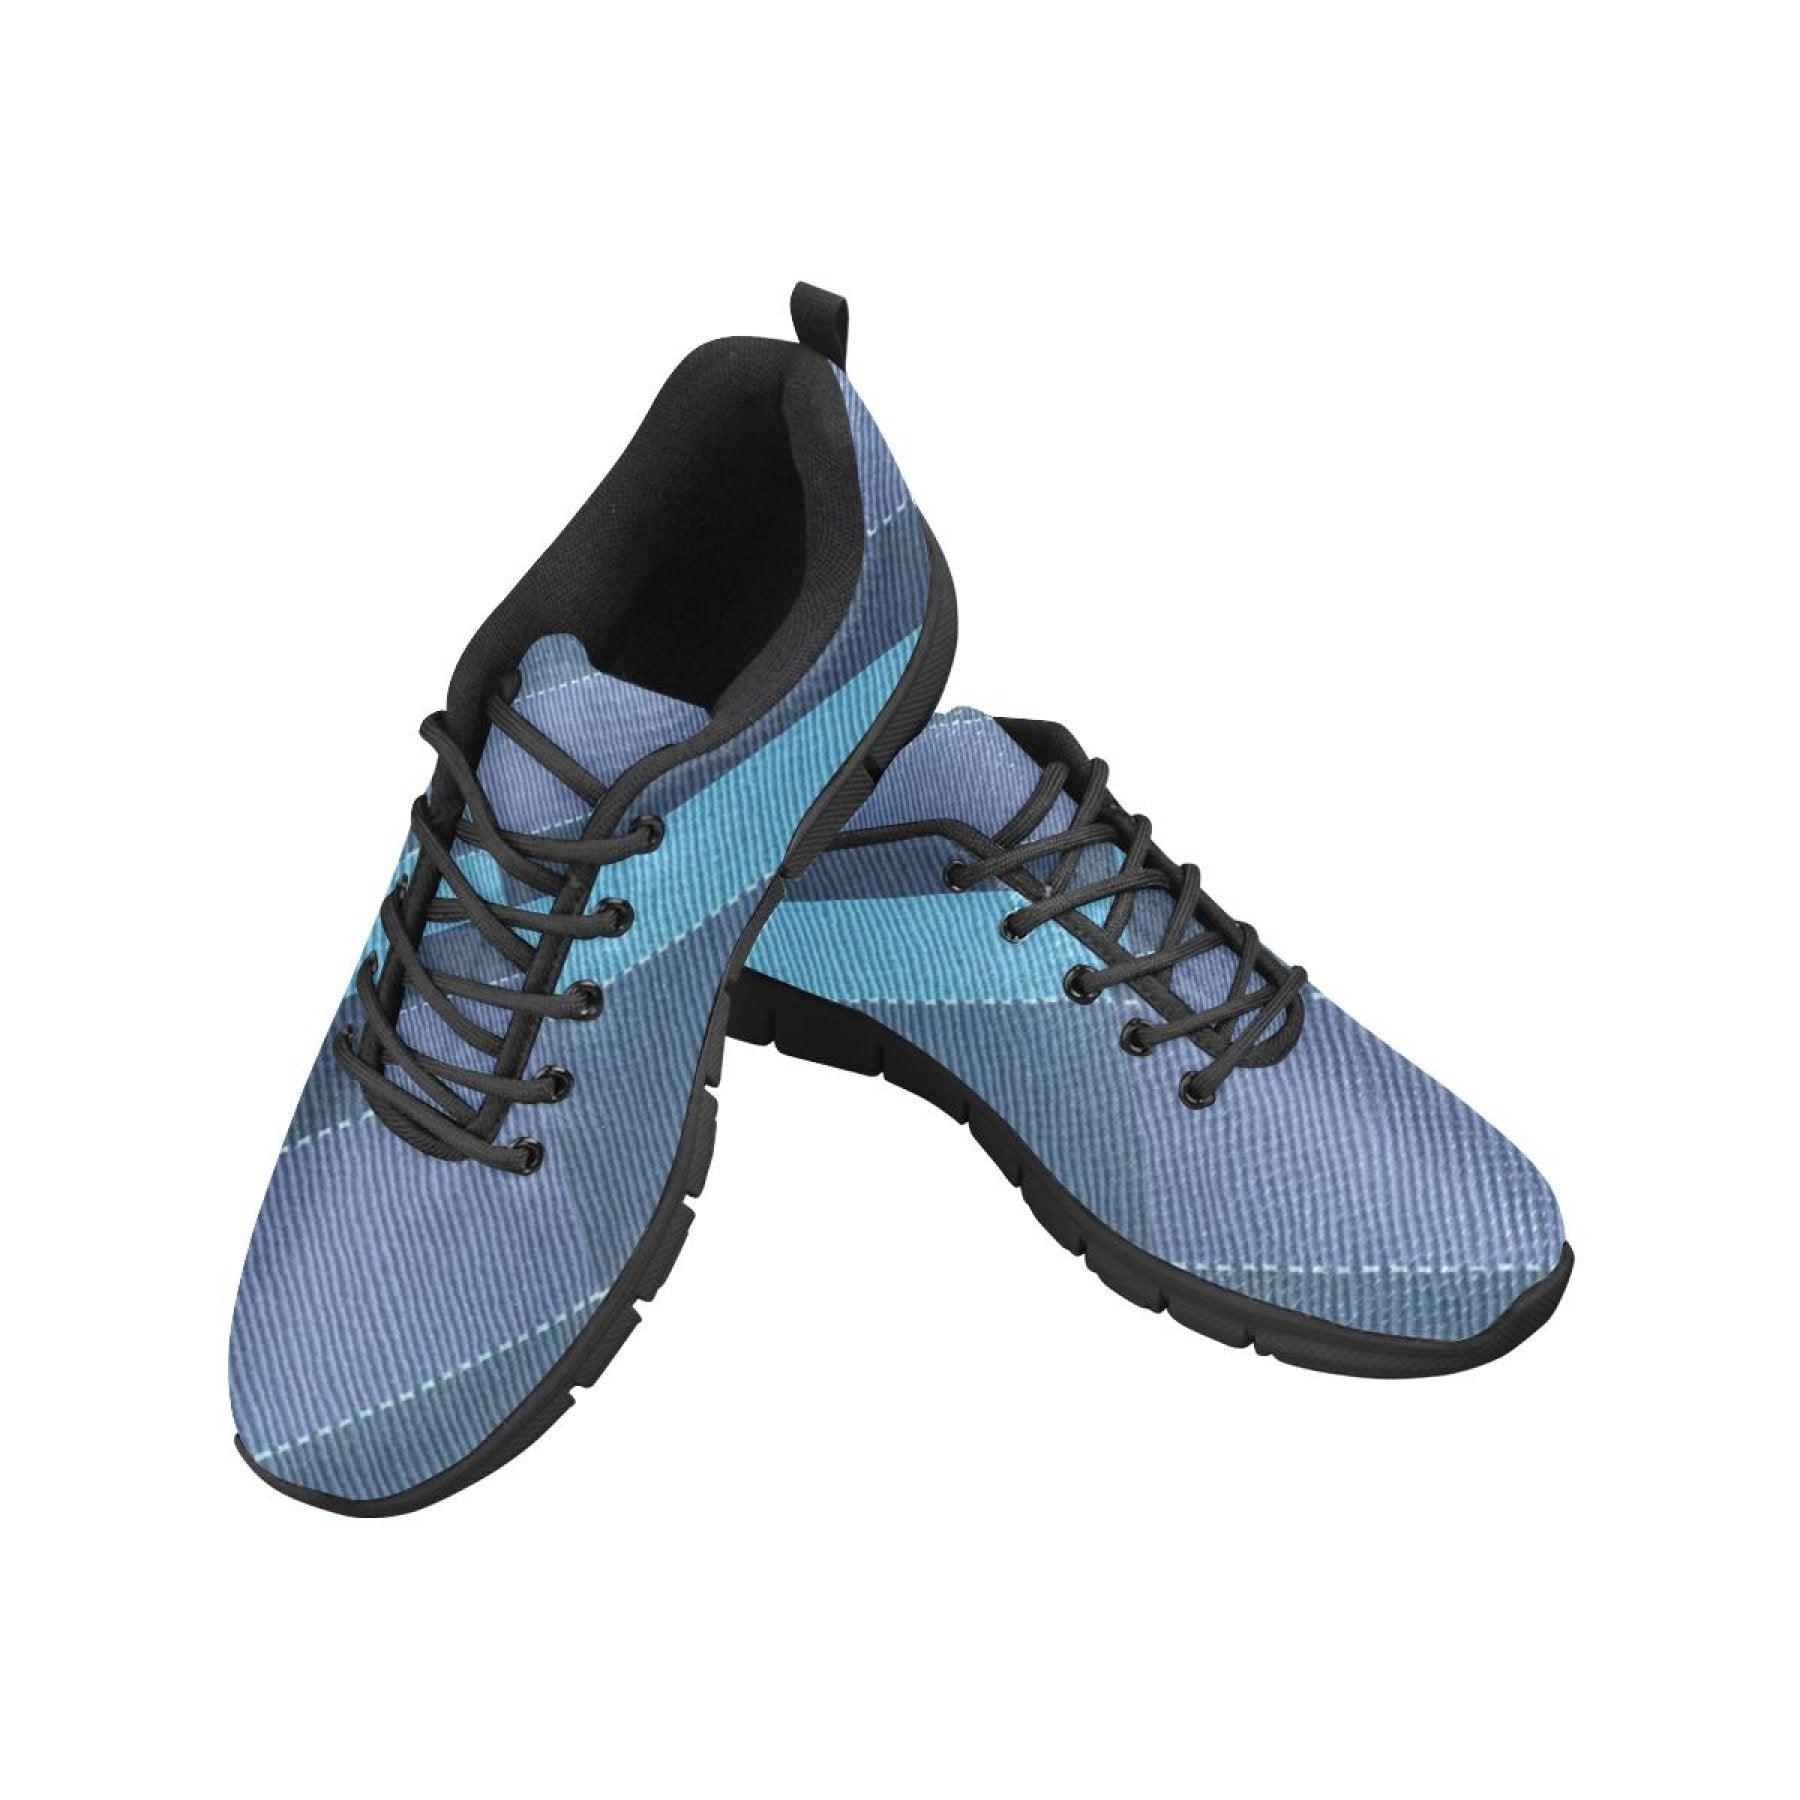 Womens Sneakers, Denim Blue Illustration Running Shoes - VirtuousWares:Global